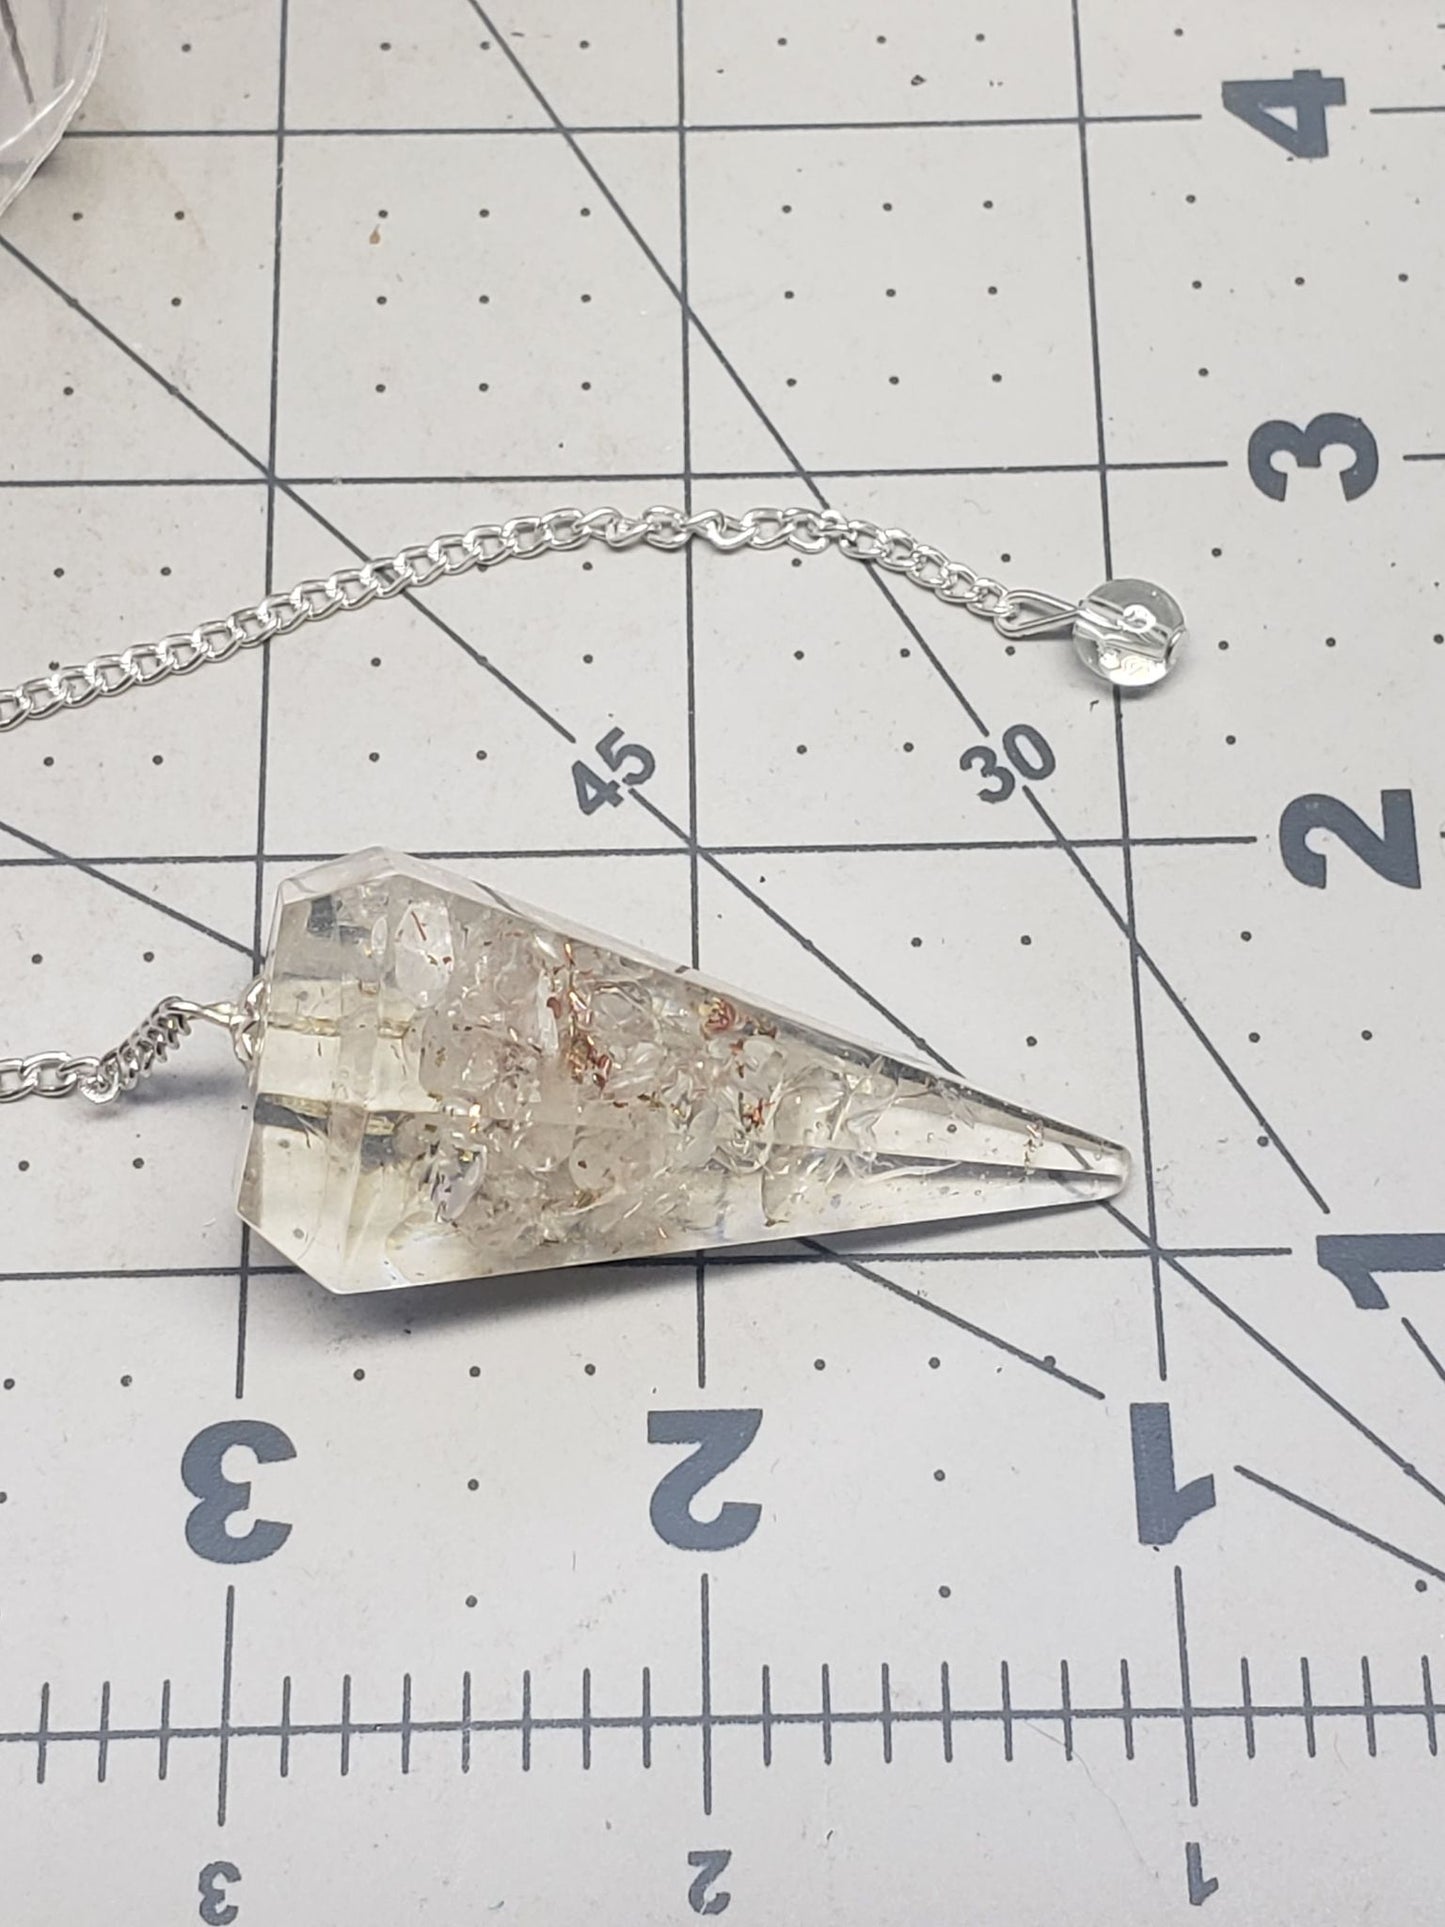 Clear Quartz 2 inch orgonite pendulum suspended from a silver 8 inch chain displayed next to a ruler